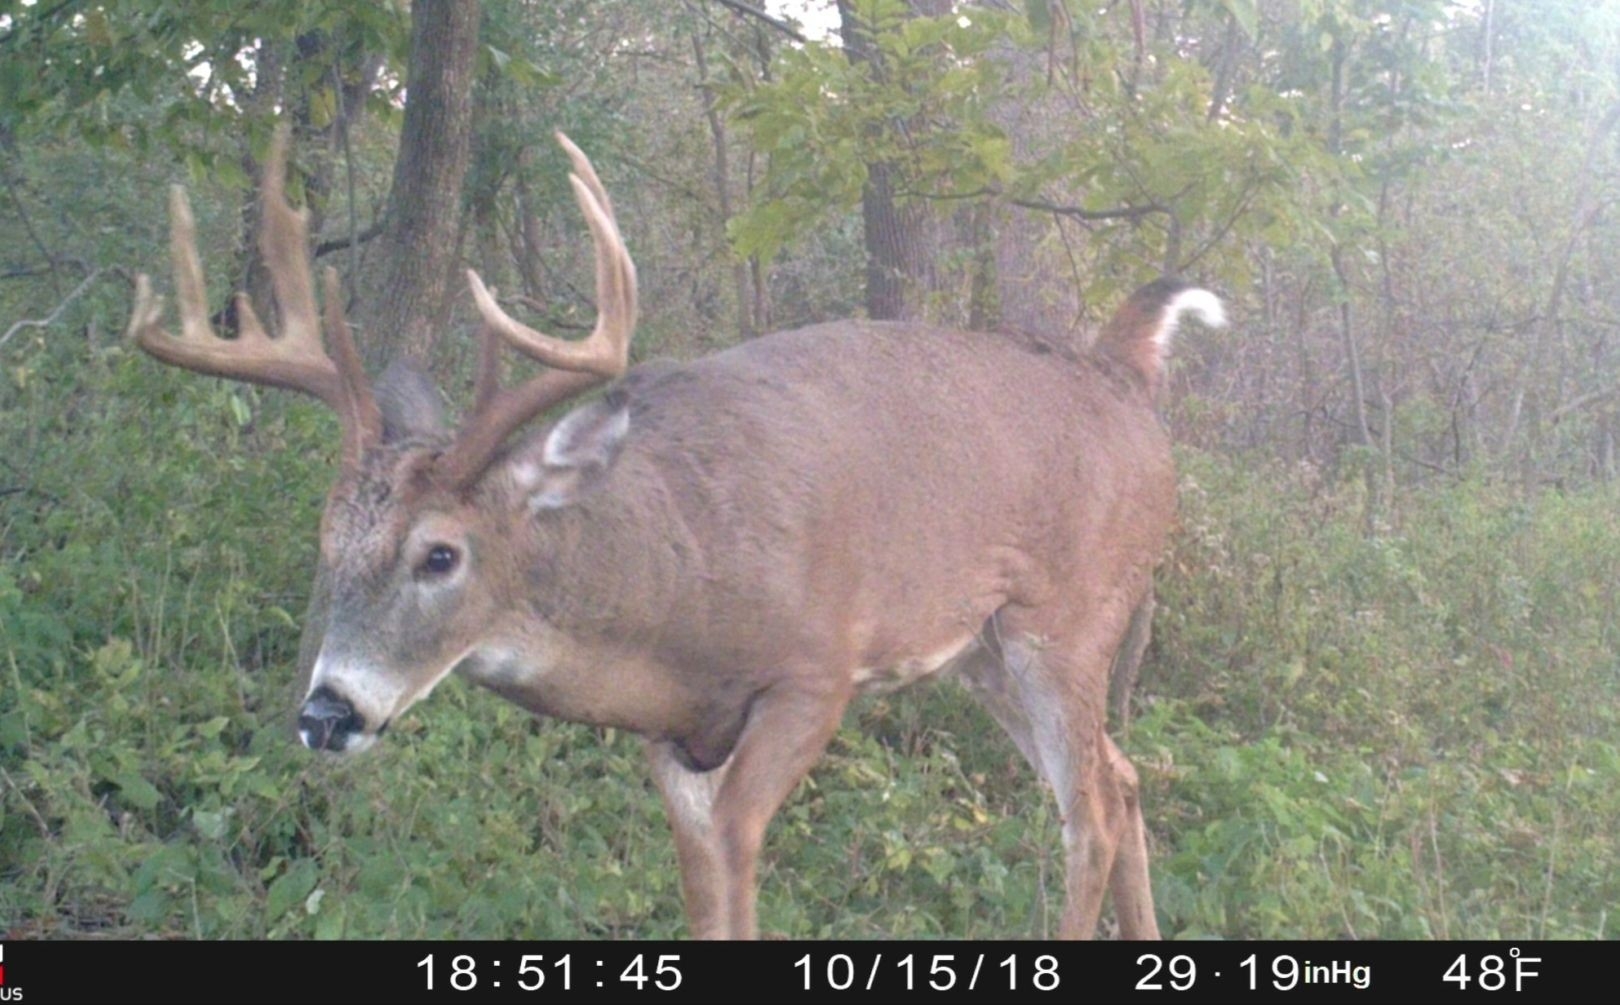 When Will The Whitetail Rut Begin | Whitetail Habitat Solutions-Indiana 2021 Whitetail Deer Rut Timing Predictions